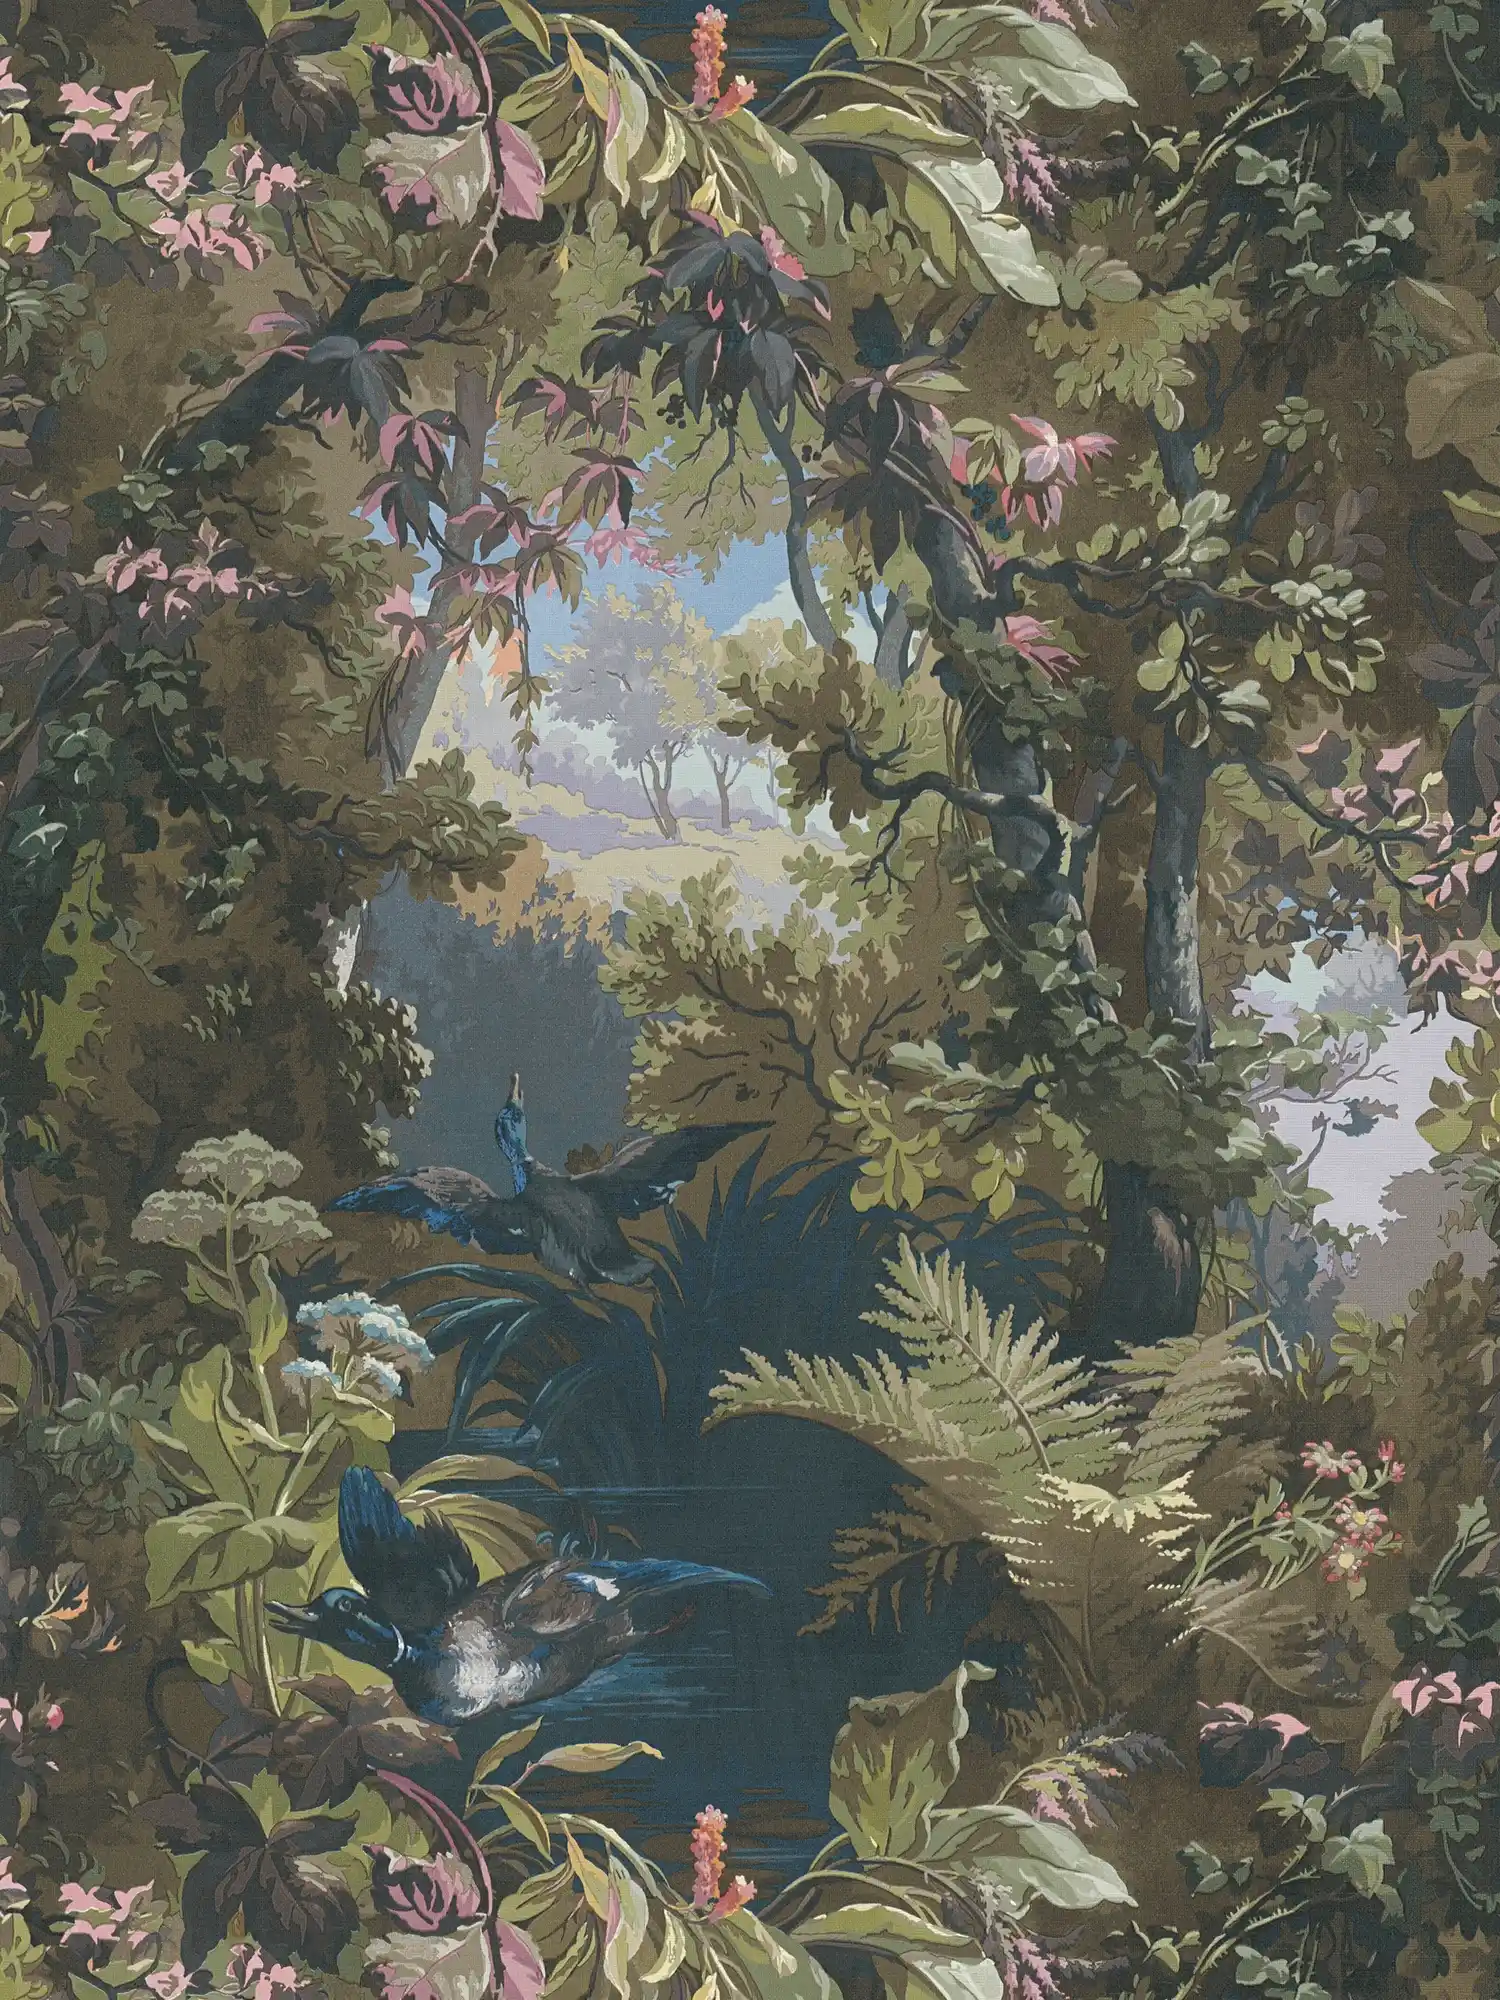 Wallpaper landscape motif in painting style - green, blue, pink
